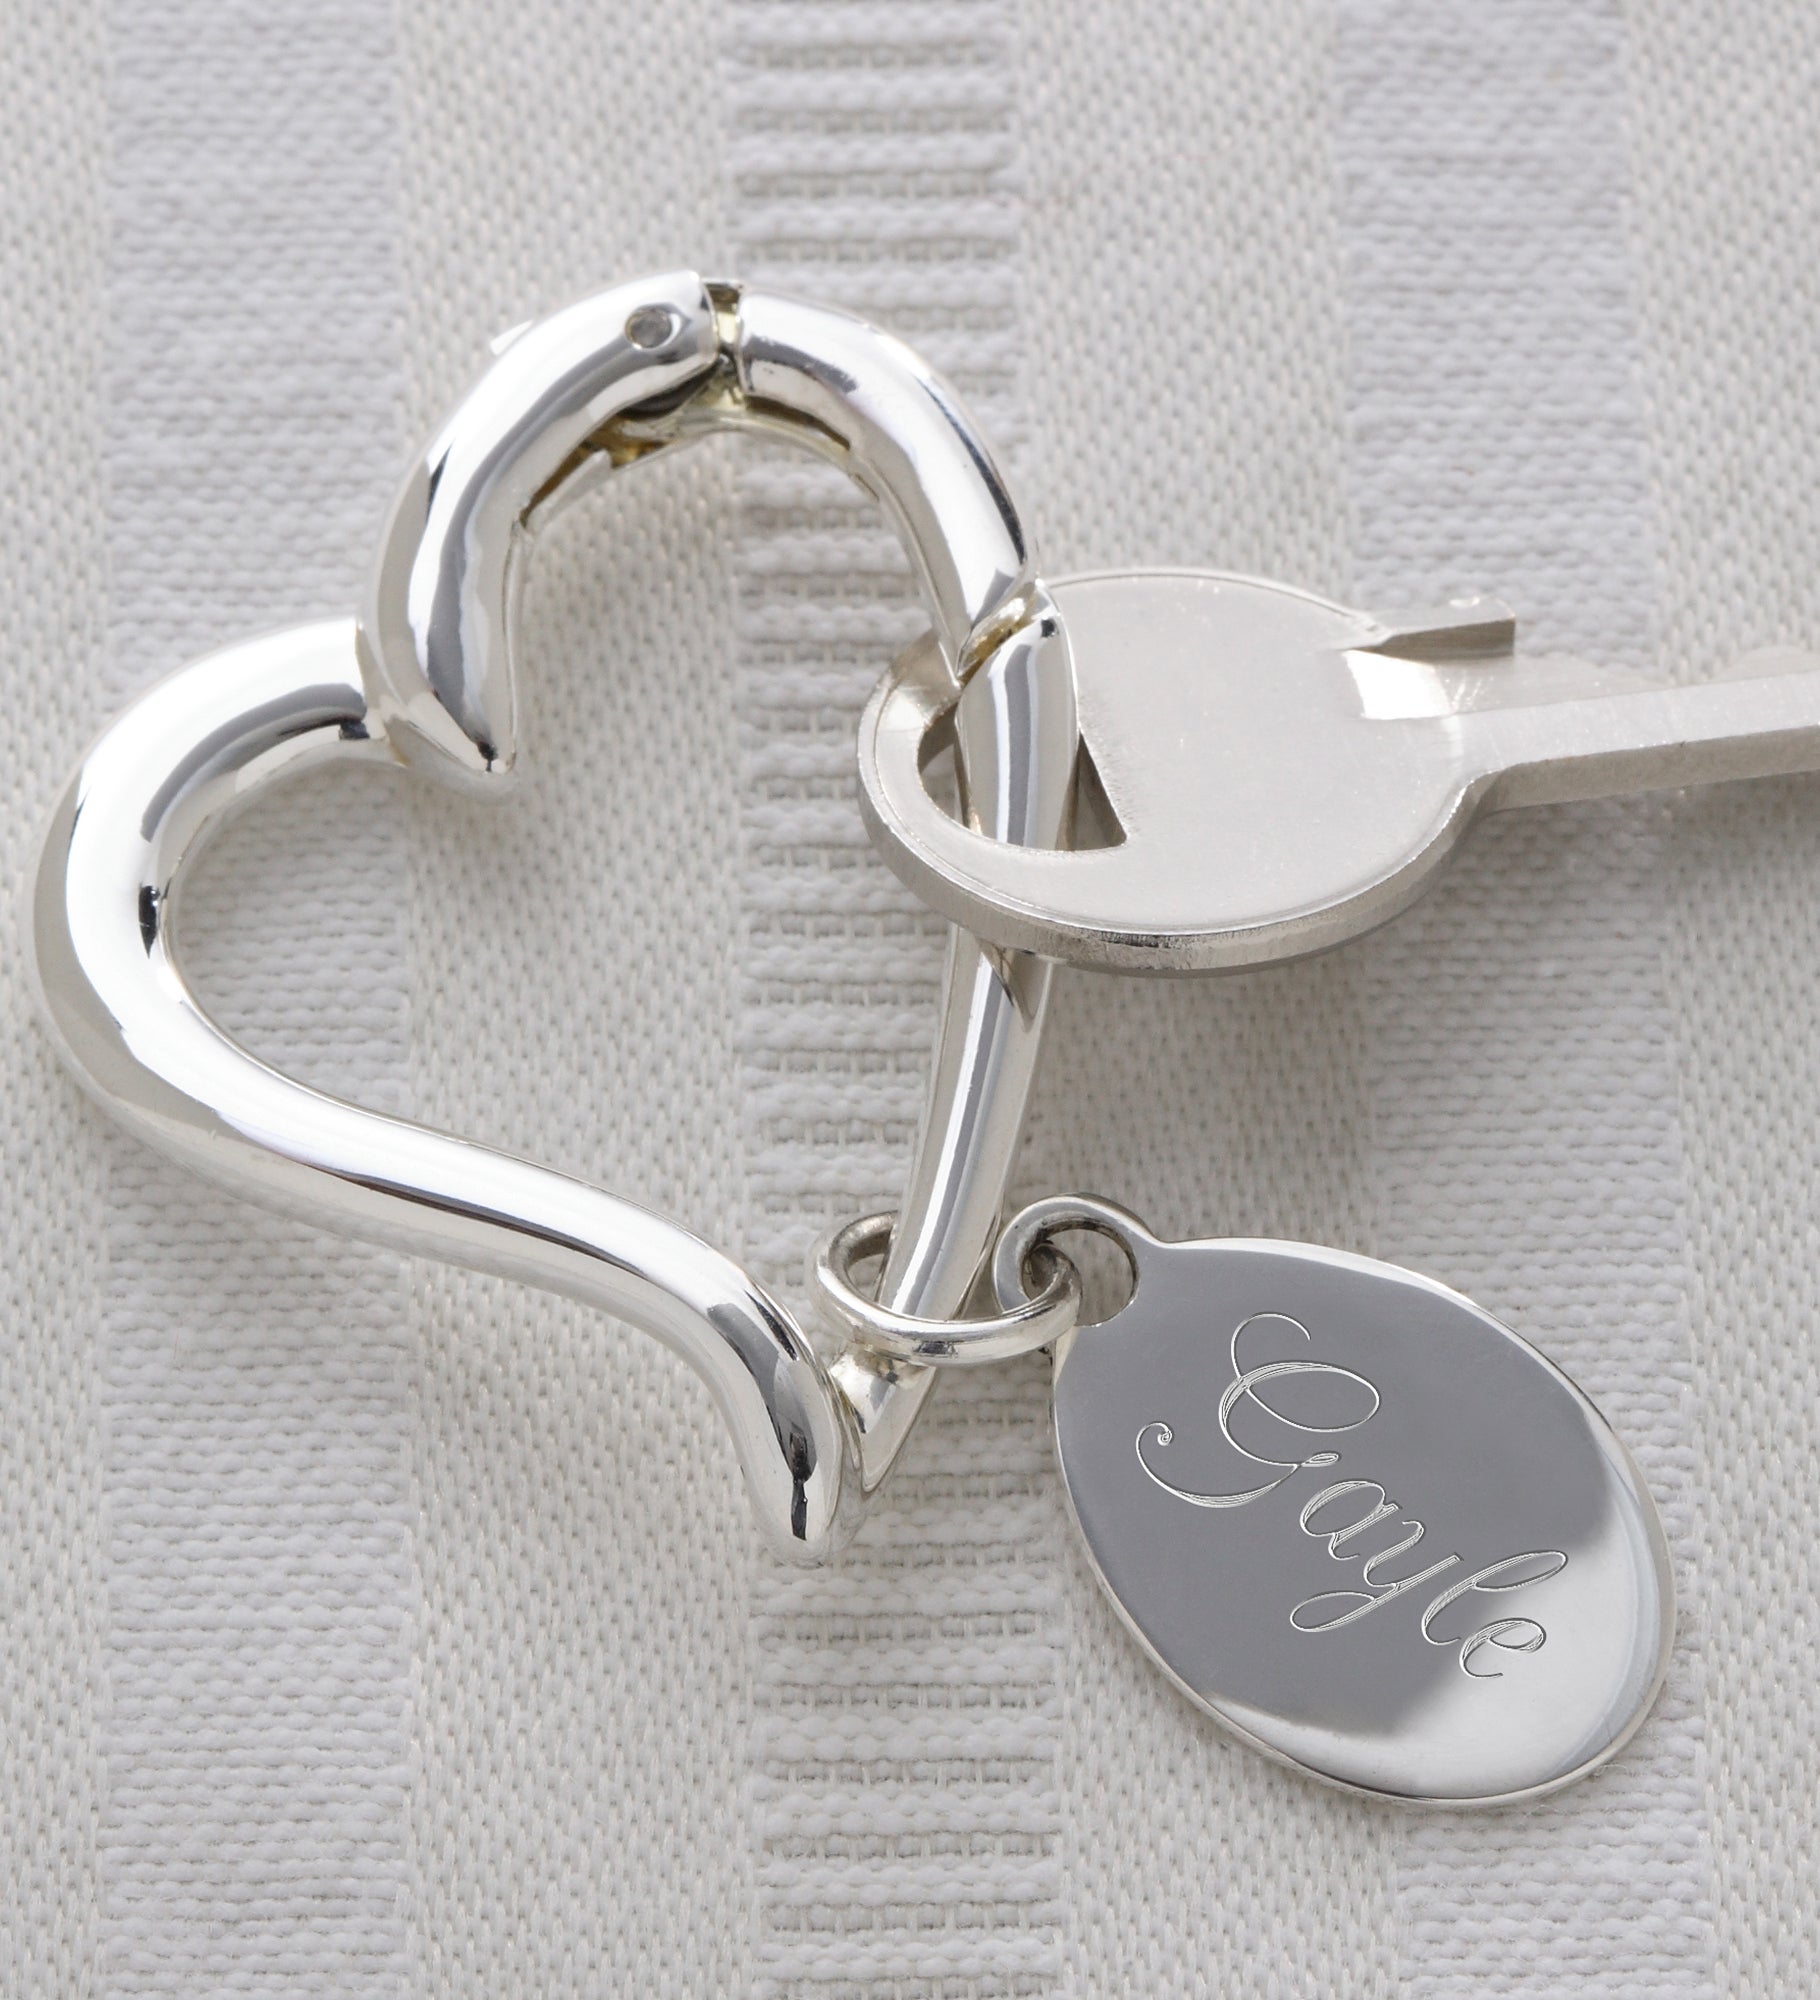 My Open Heart 2-Sided Personalized Keyring